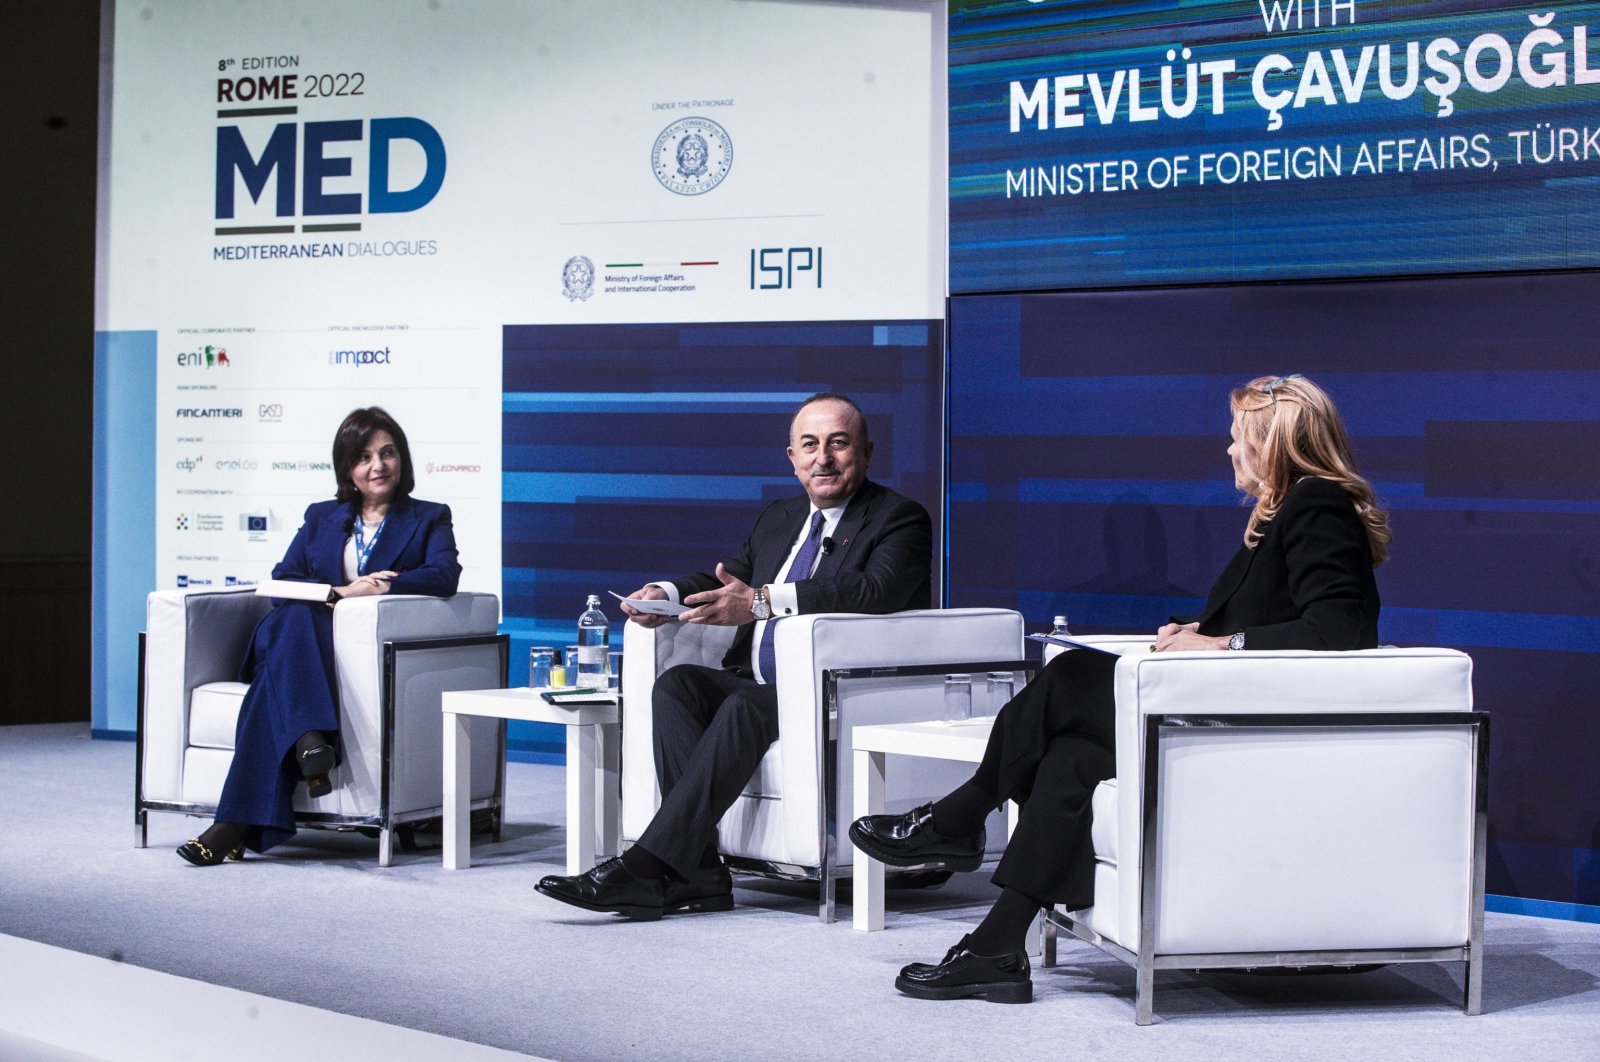  Foreign Minister Mevlüt Çavuşoğlu attends a panel during the Rome Med 2022, Mediterranean Dialogues conference in Rome, Italy, Dec. 2, 2022. (EPA Photo)